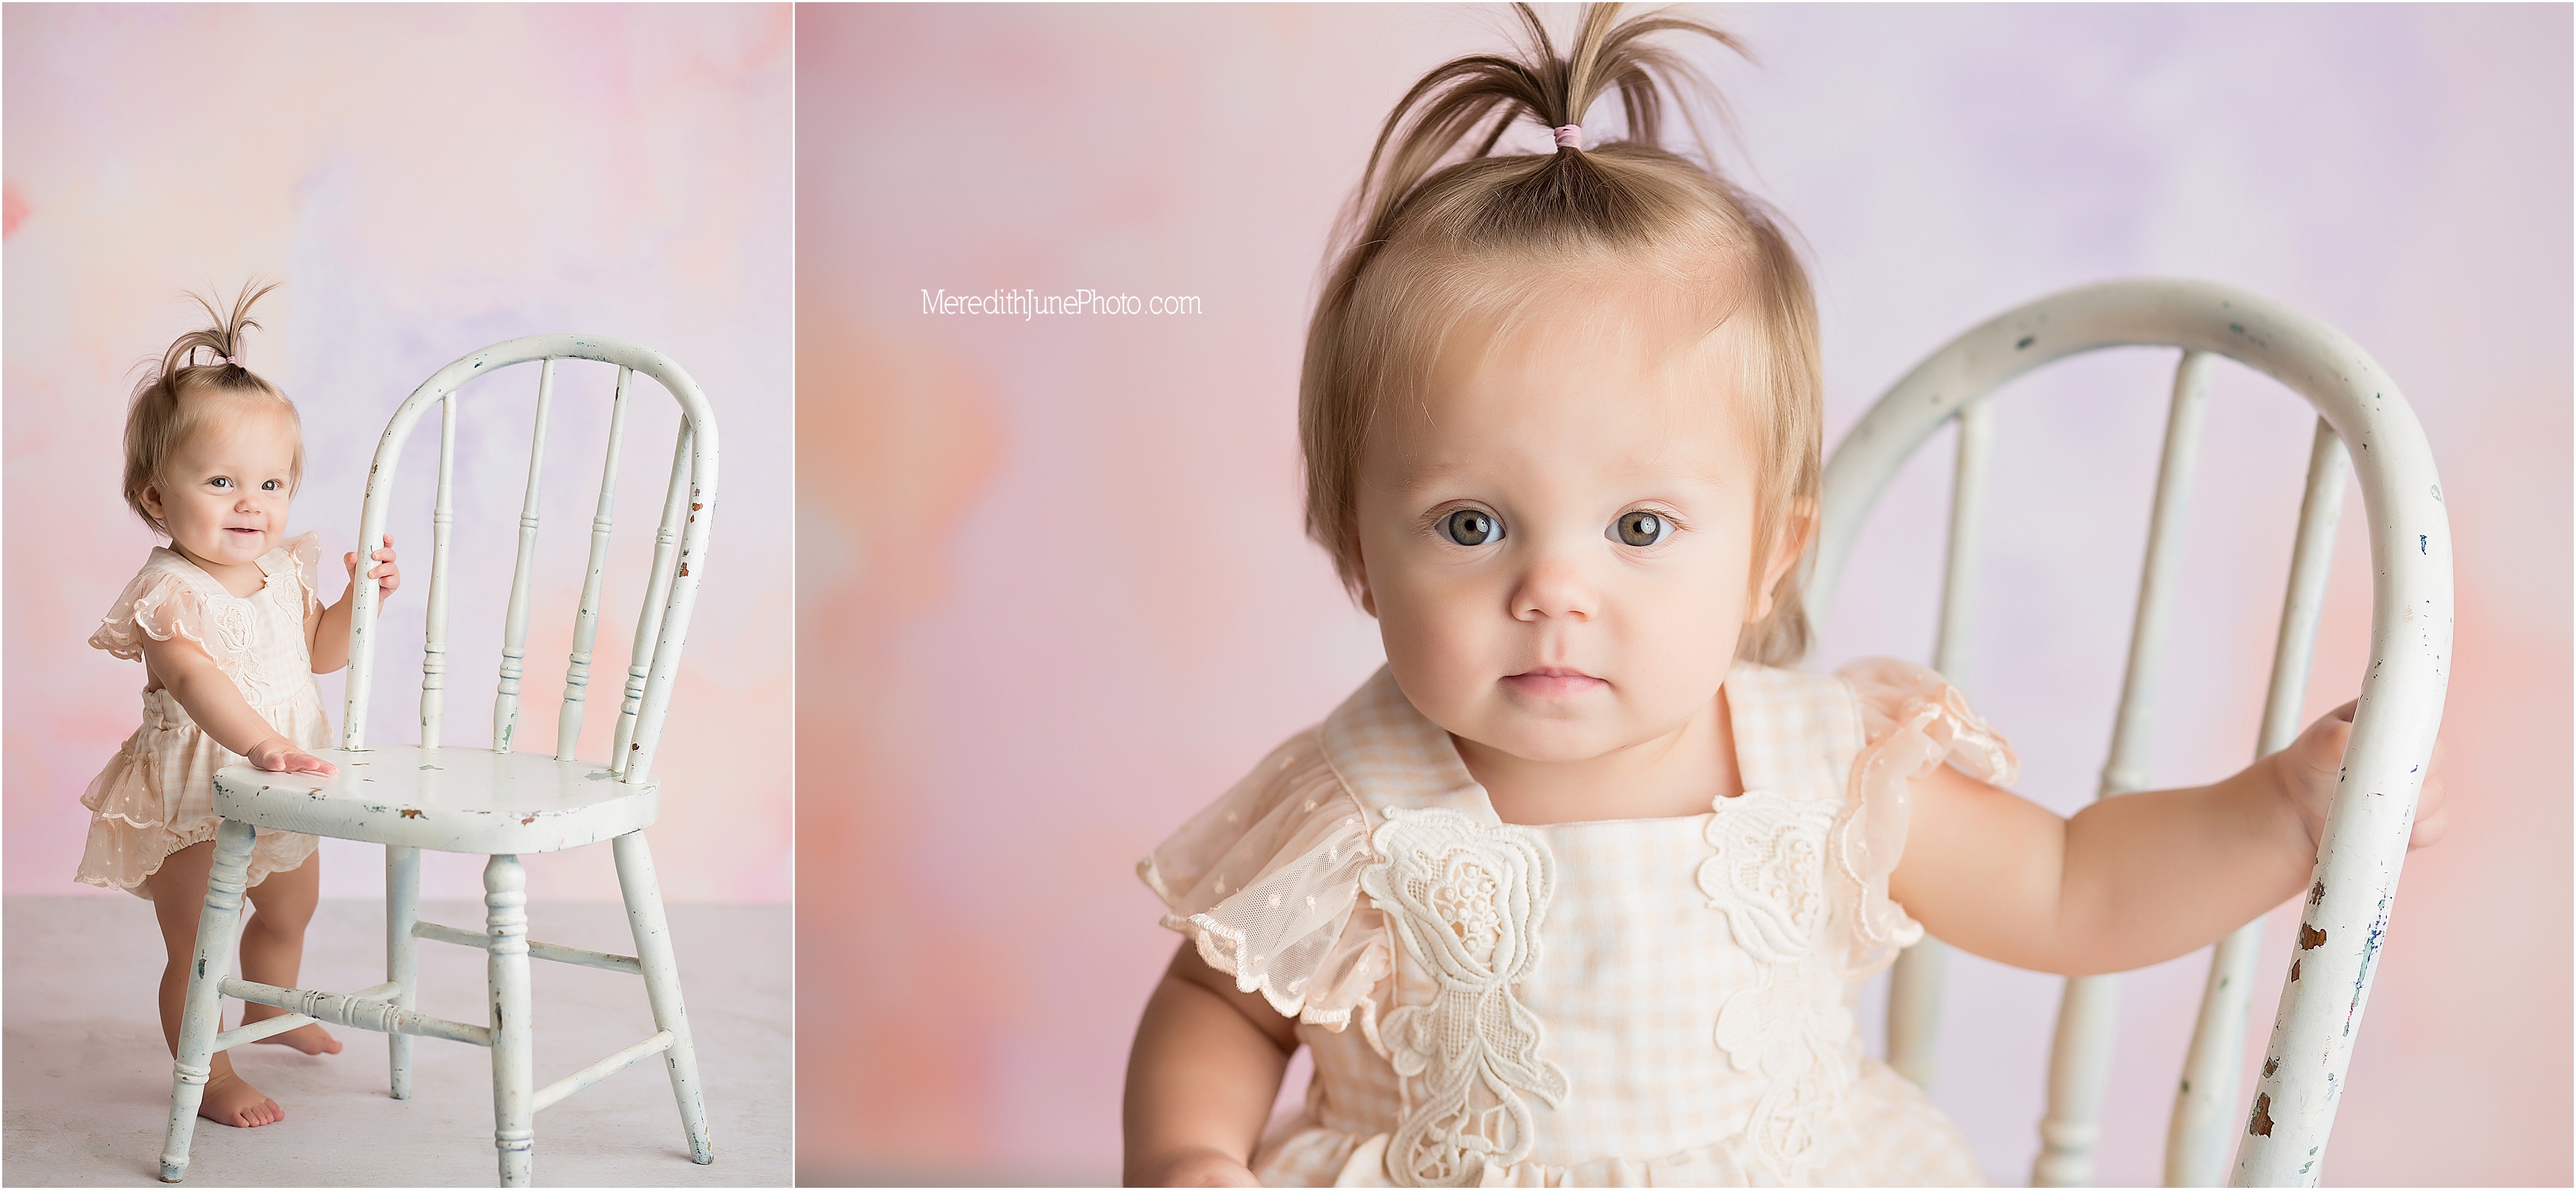 Annie's first year photos at Meredith June Photography 